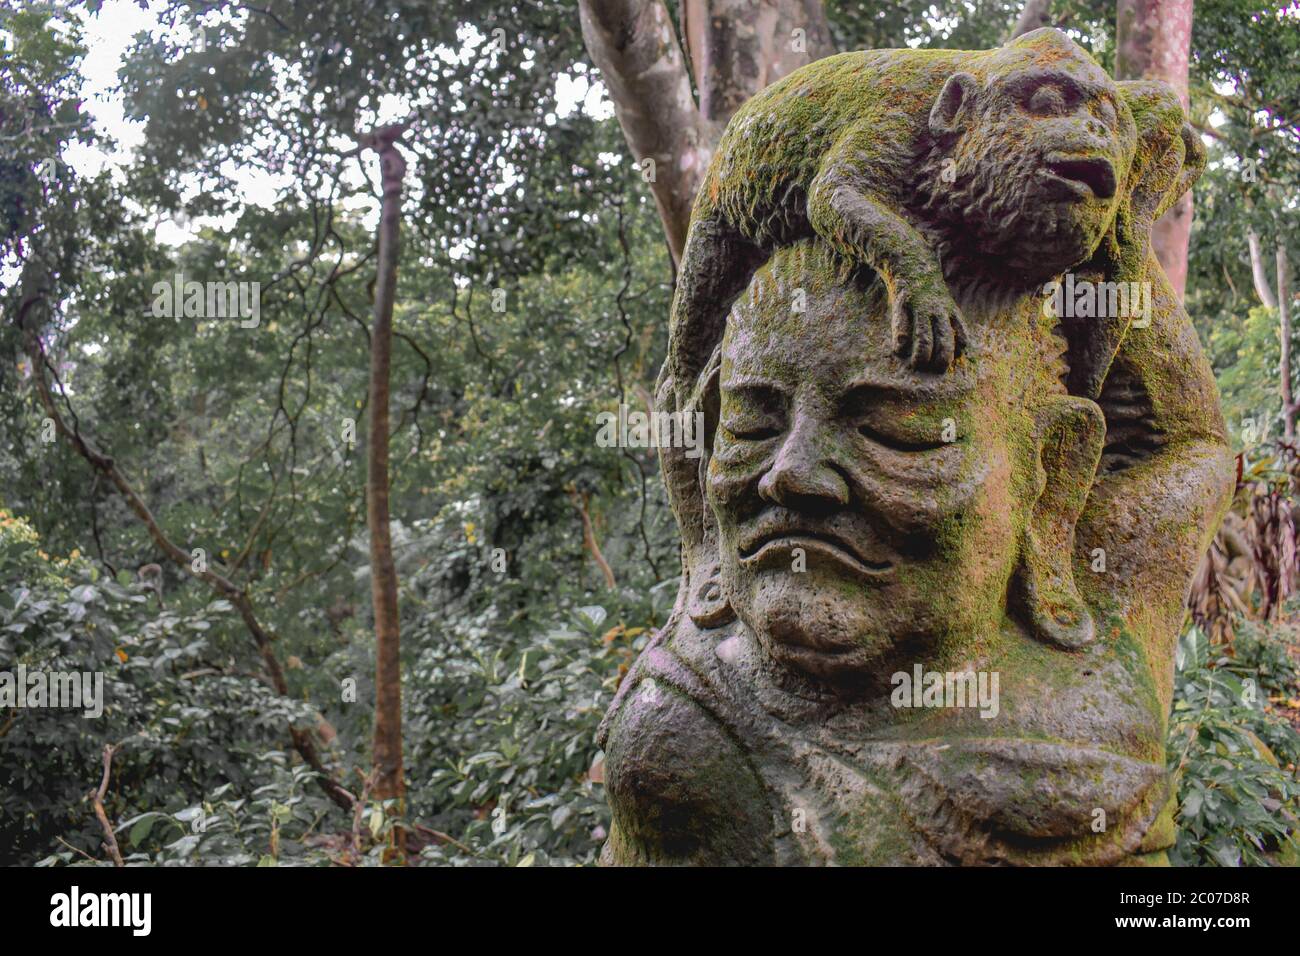 Statue of a monkey sitting on a human head covered by moss in the Sacret Monkey Forest in Ubud Bali Indonesia Stock Photo